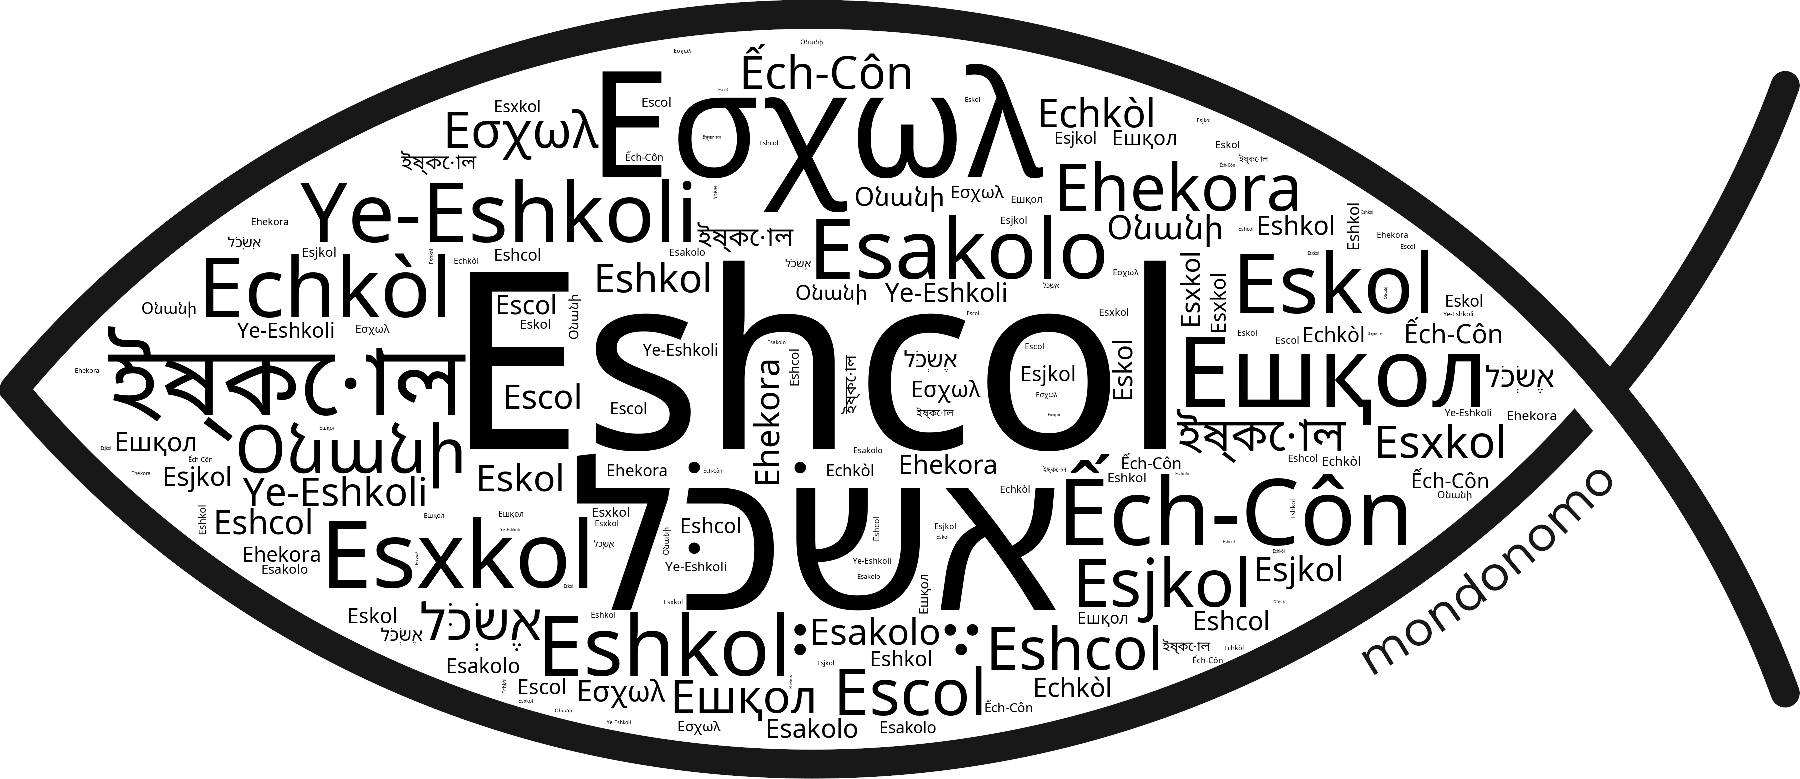 Name Eshcol in the world's Bibles